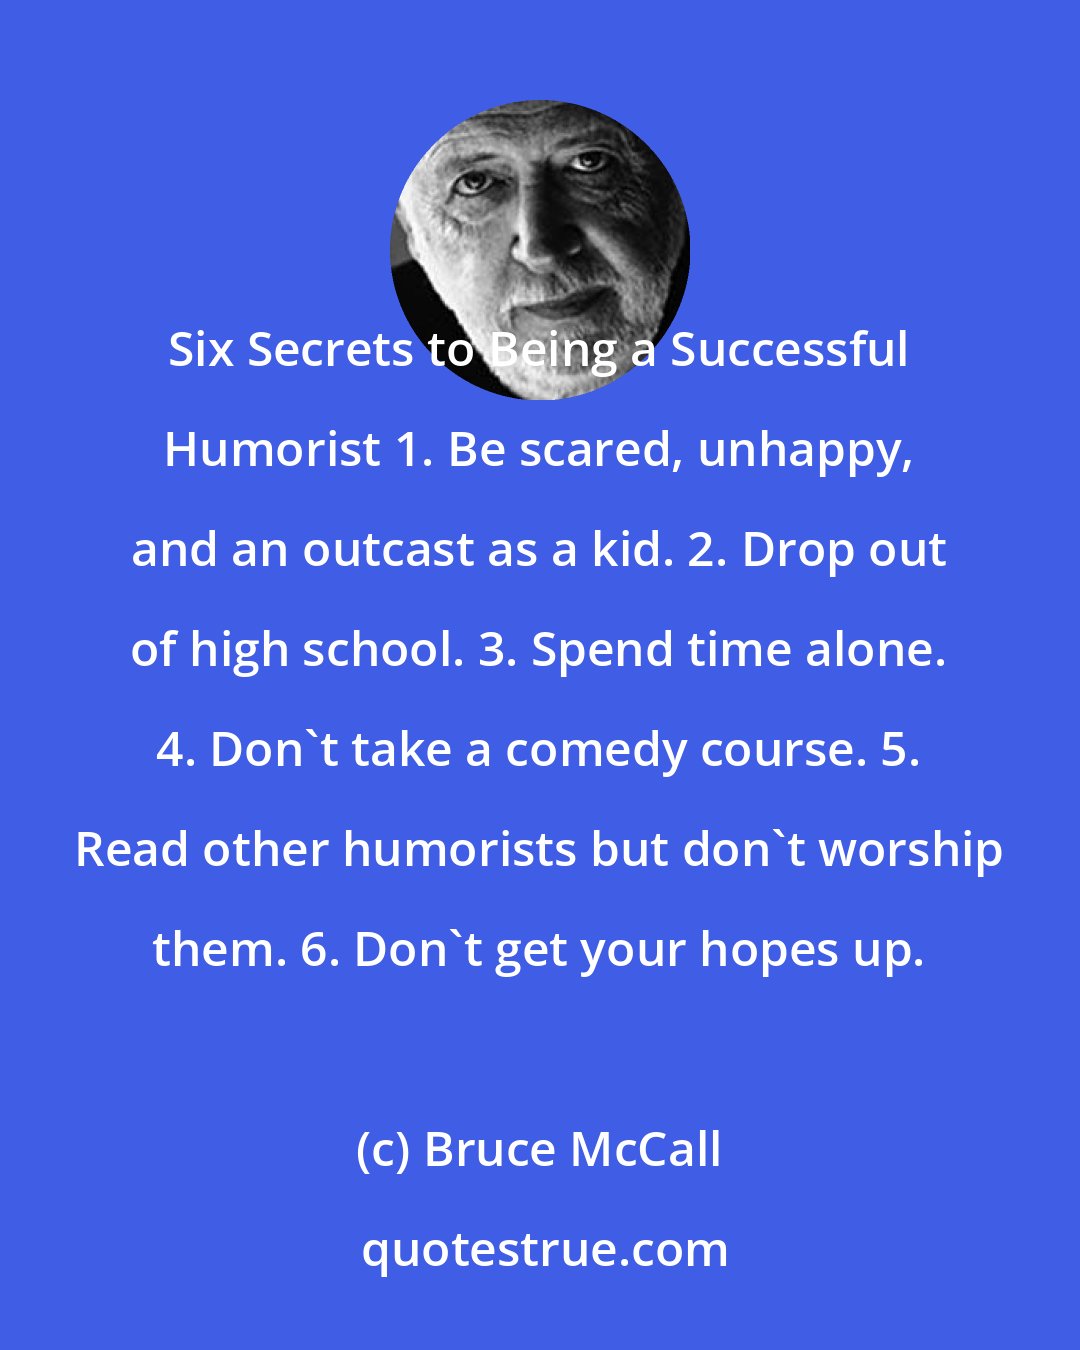 Bruce McCall: Six Secrets to Being a Successful Humorist 1. Be scared, unhappy, and an outcast as a kid. 2. Drop out of high school. 3. Spend time alone. 4. Don't take a comedy course. 5. Read other humorists but don't worship them. 6. Don't get your hopes up.